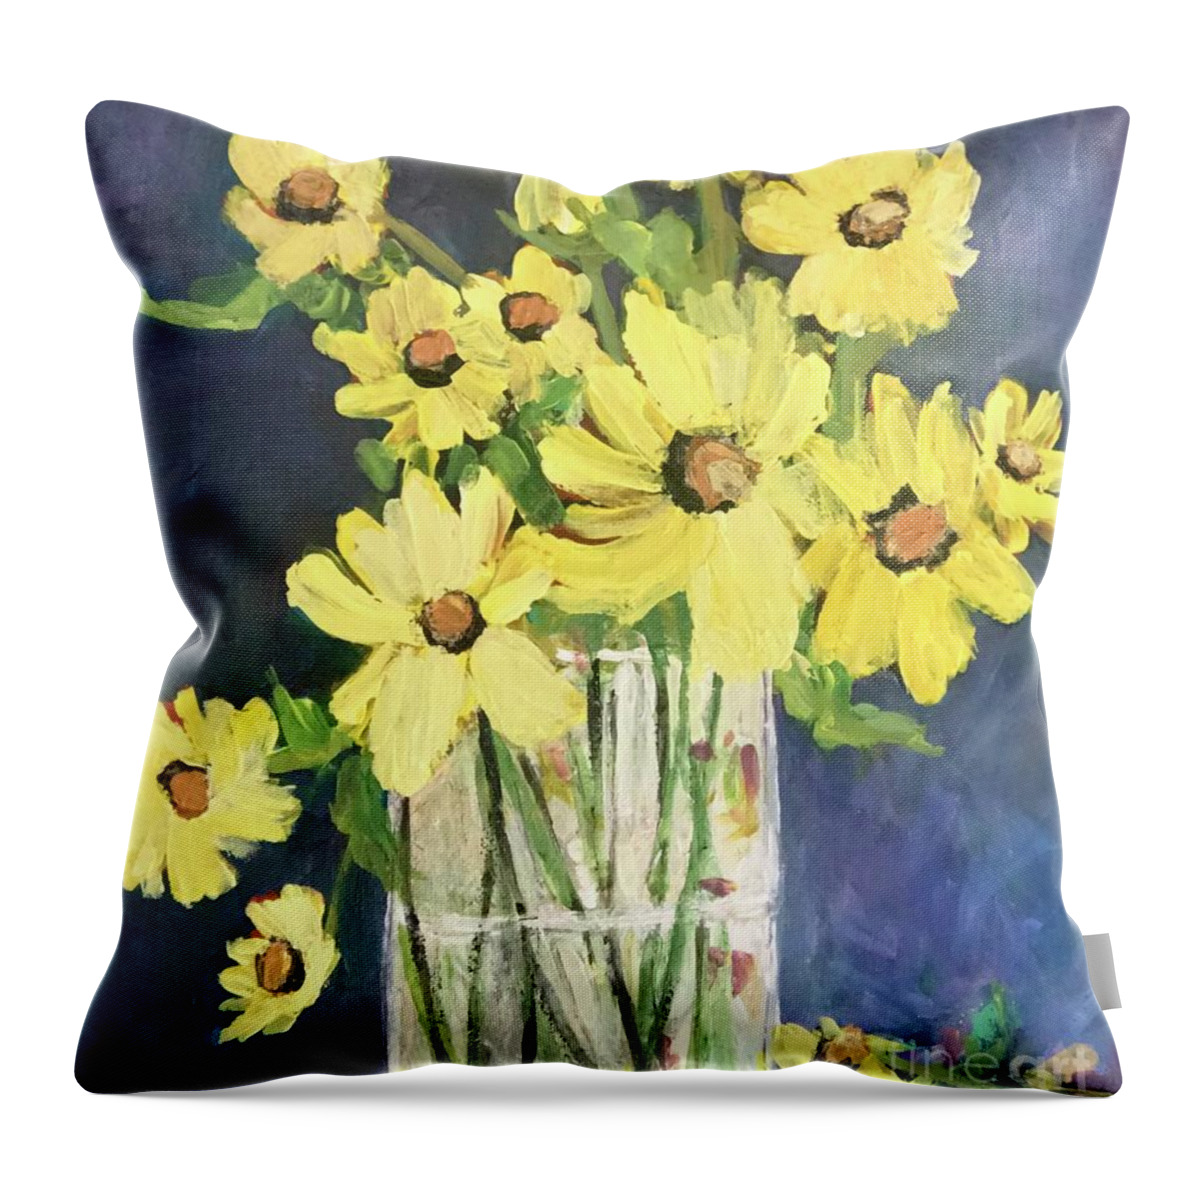 Sunshine Throw Pillow featuring the painting Hello Sunshine by Sherry Harradence